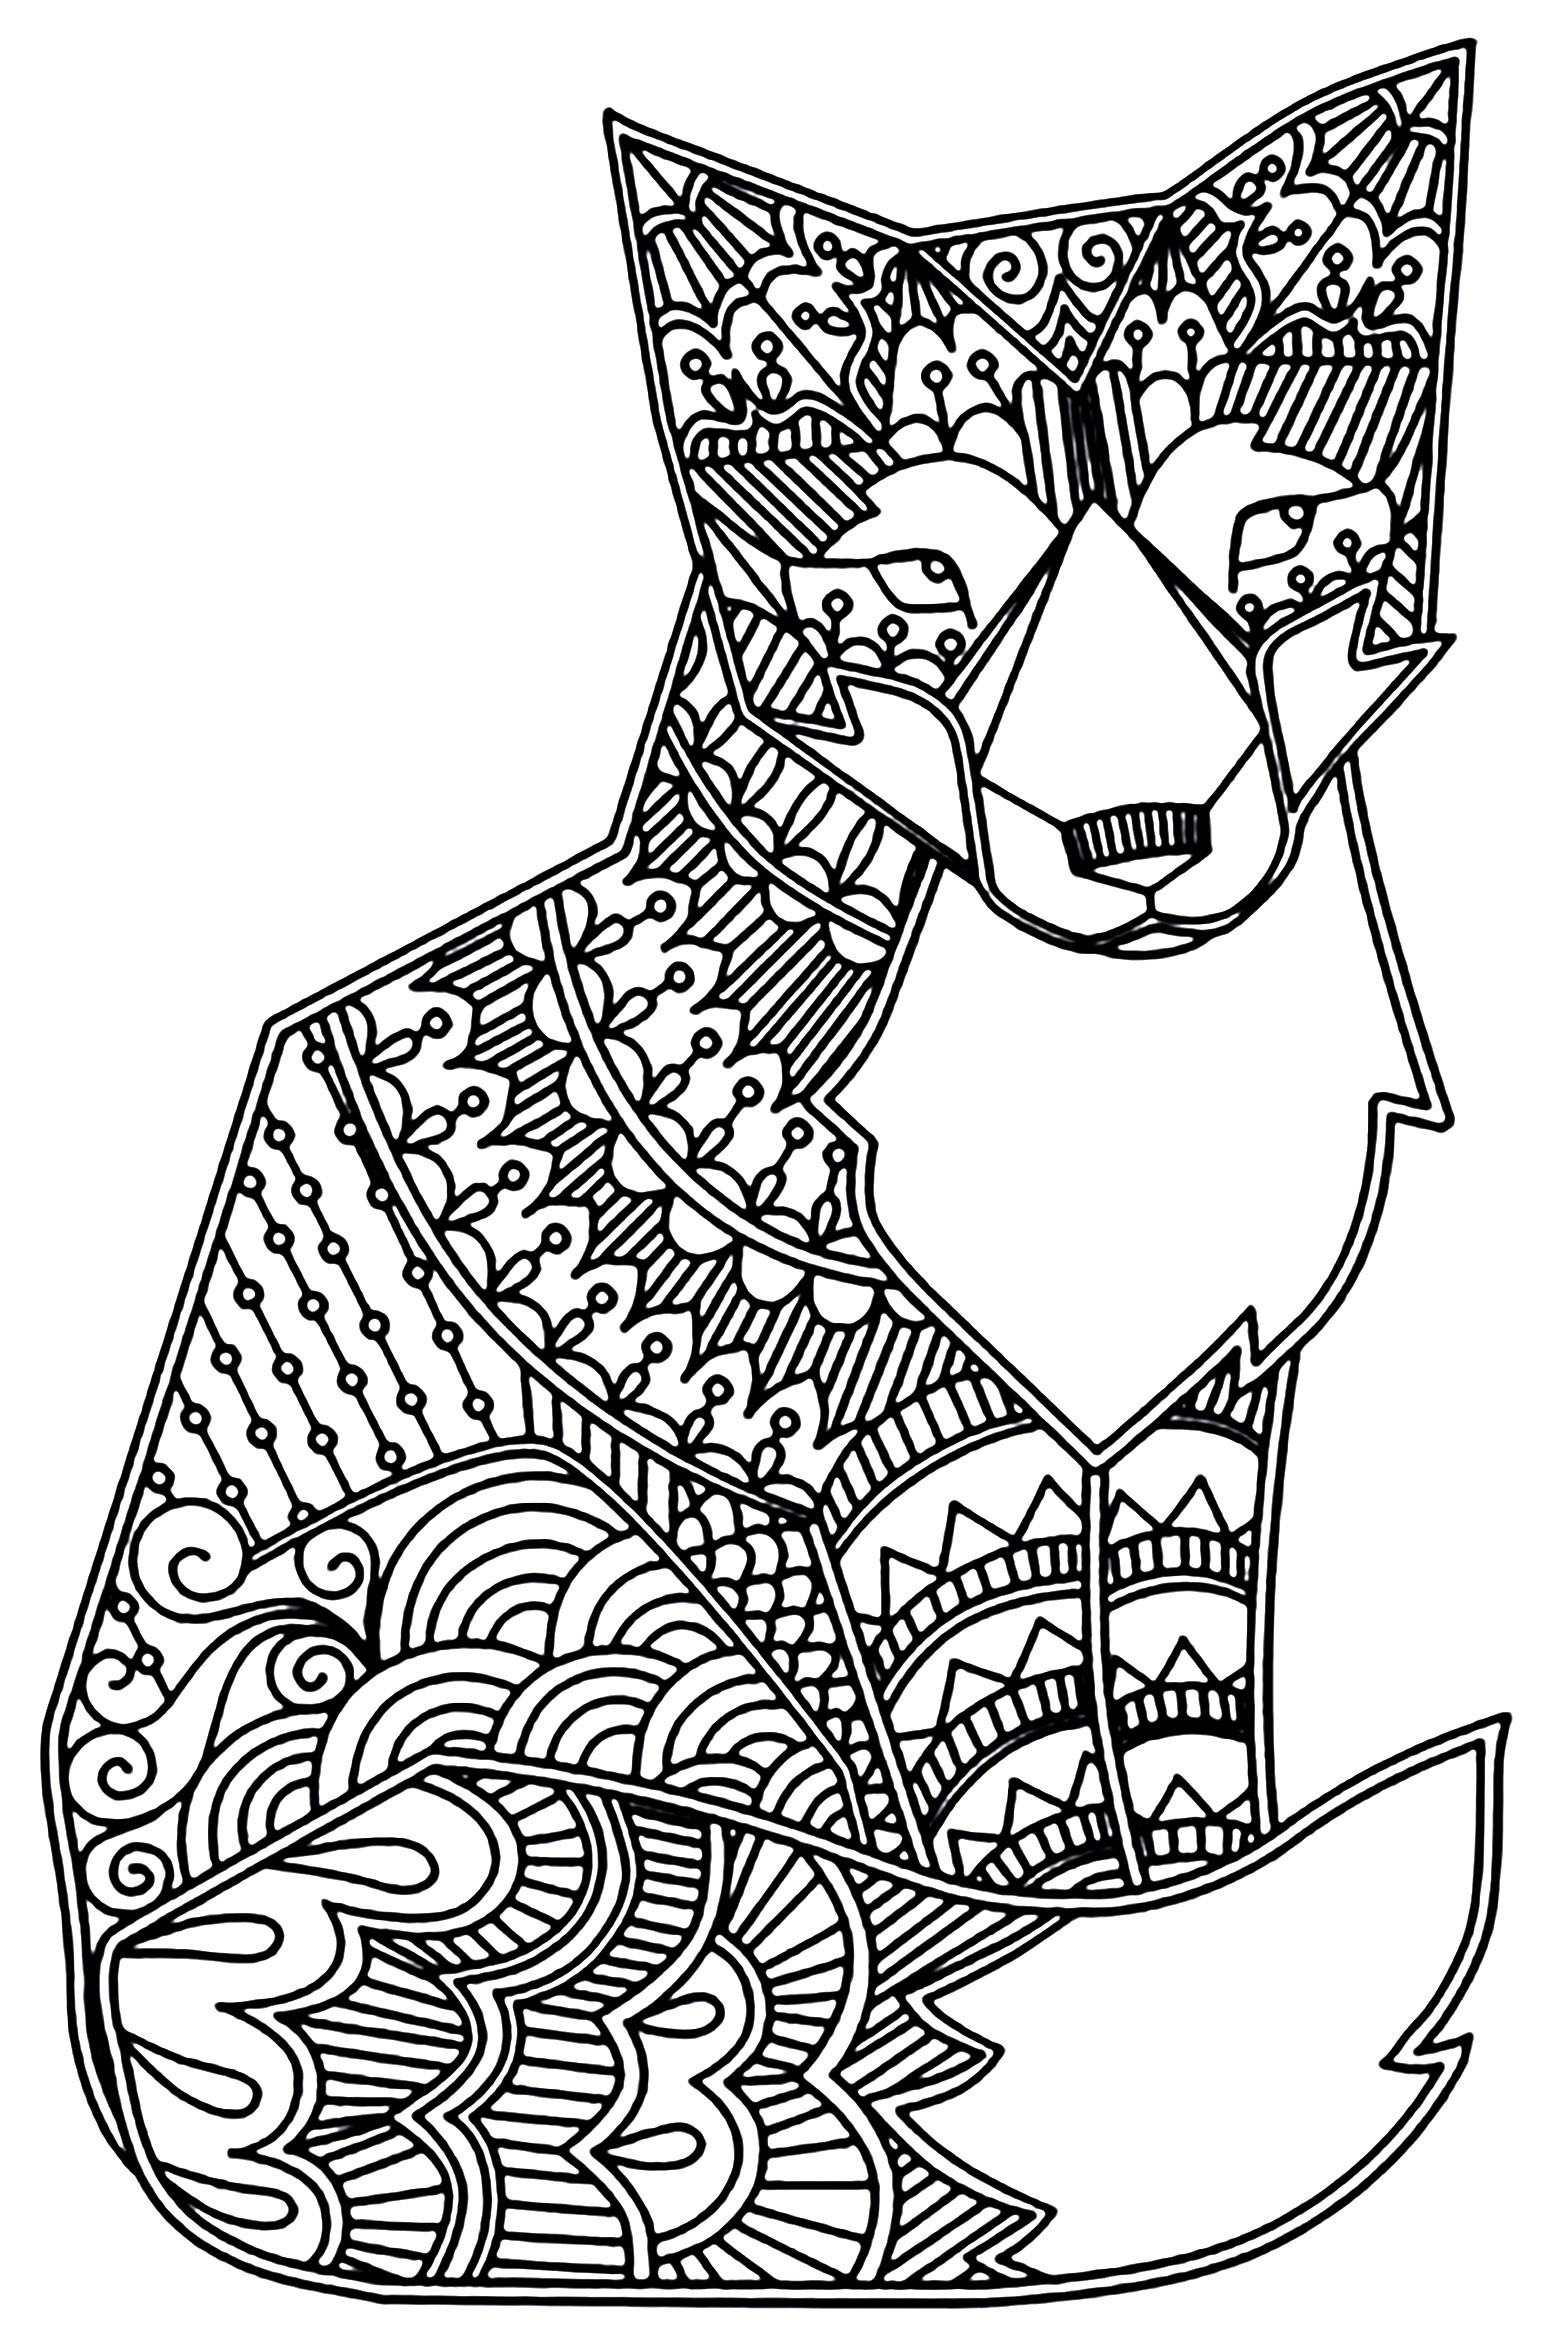 Fox Girl Coloring Pages For Adults
 Fox Foxes Adult Coloring Pages